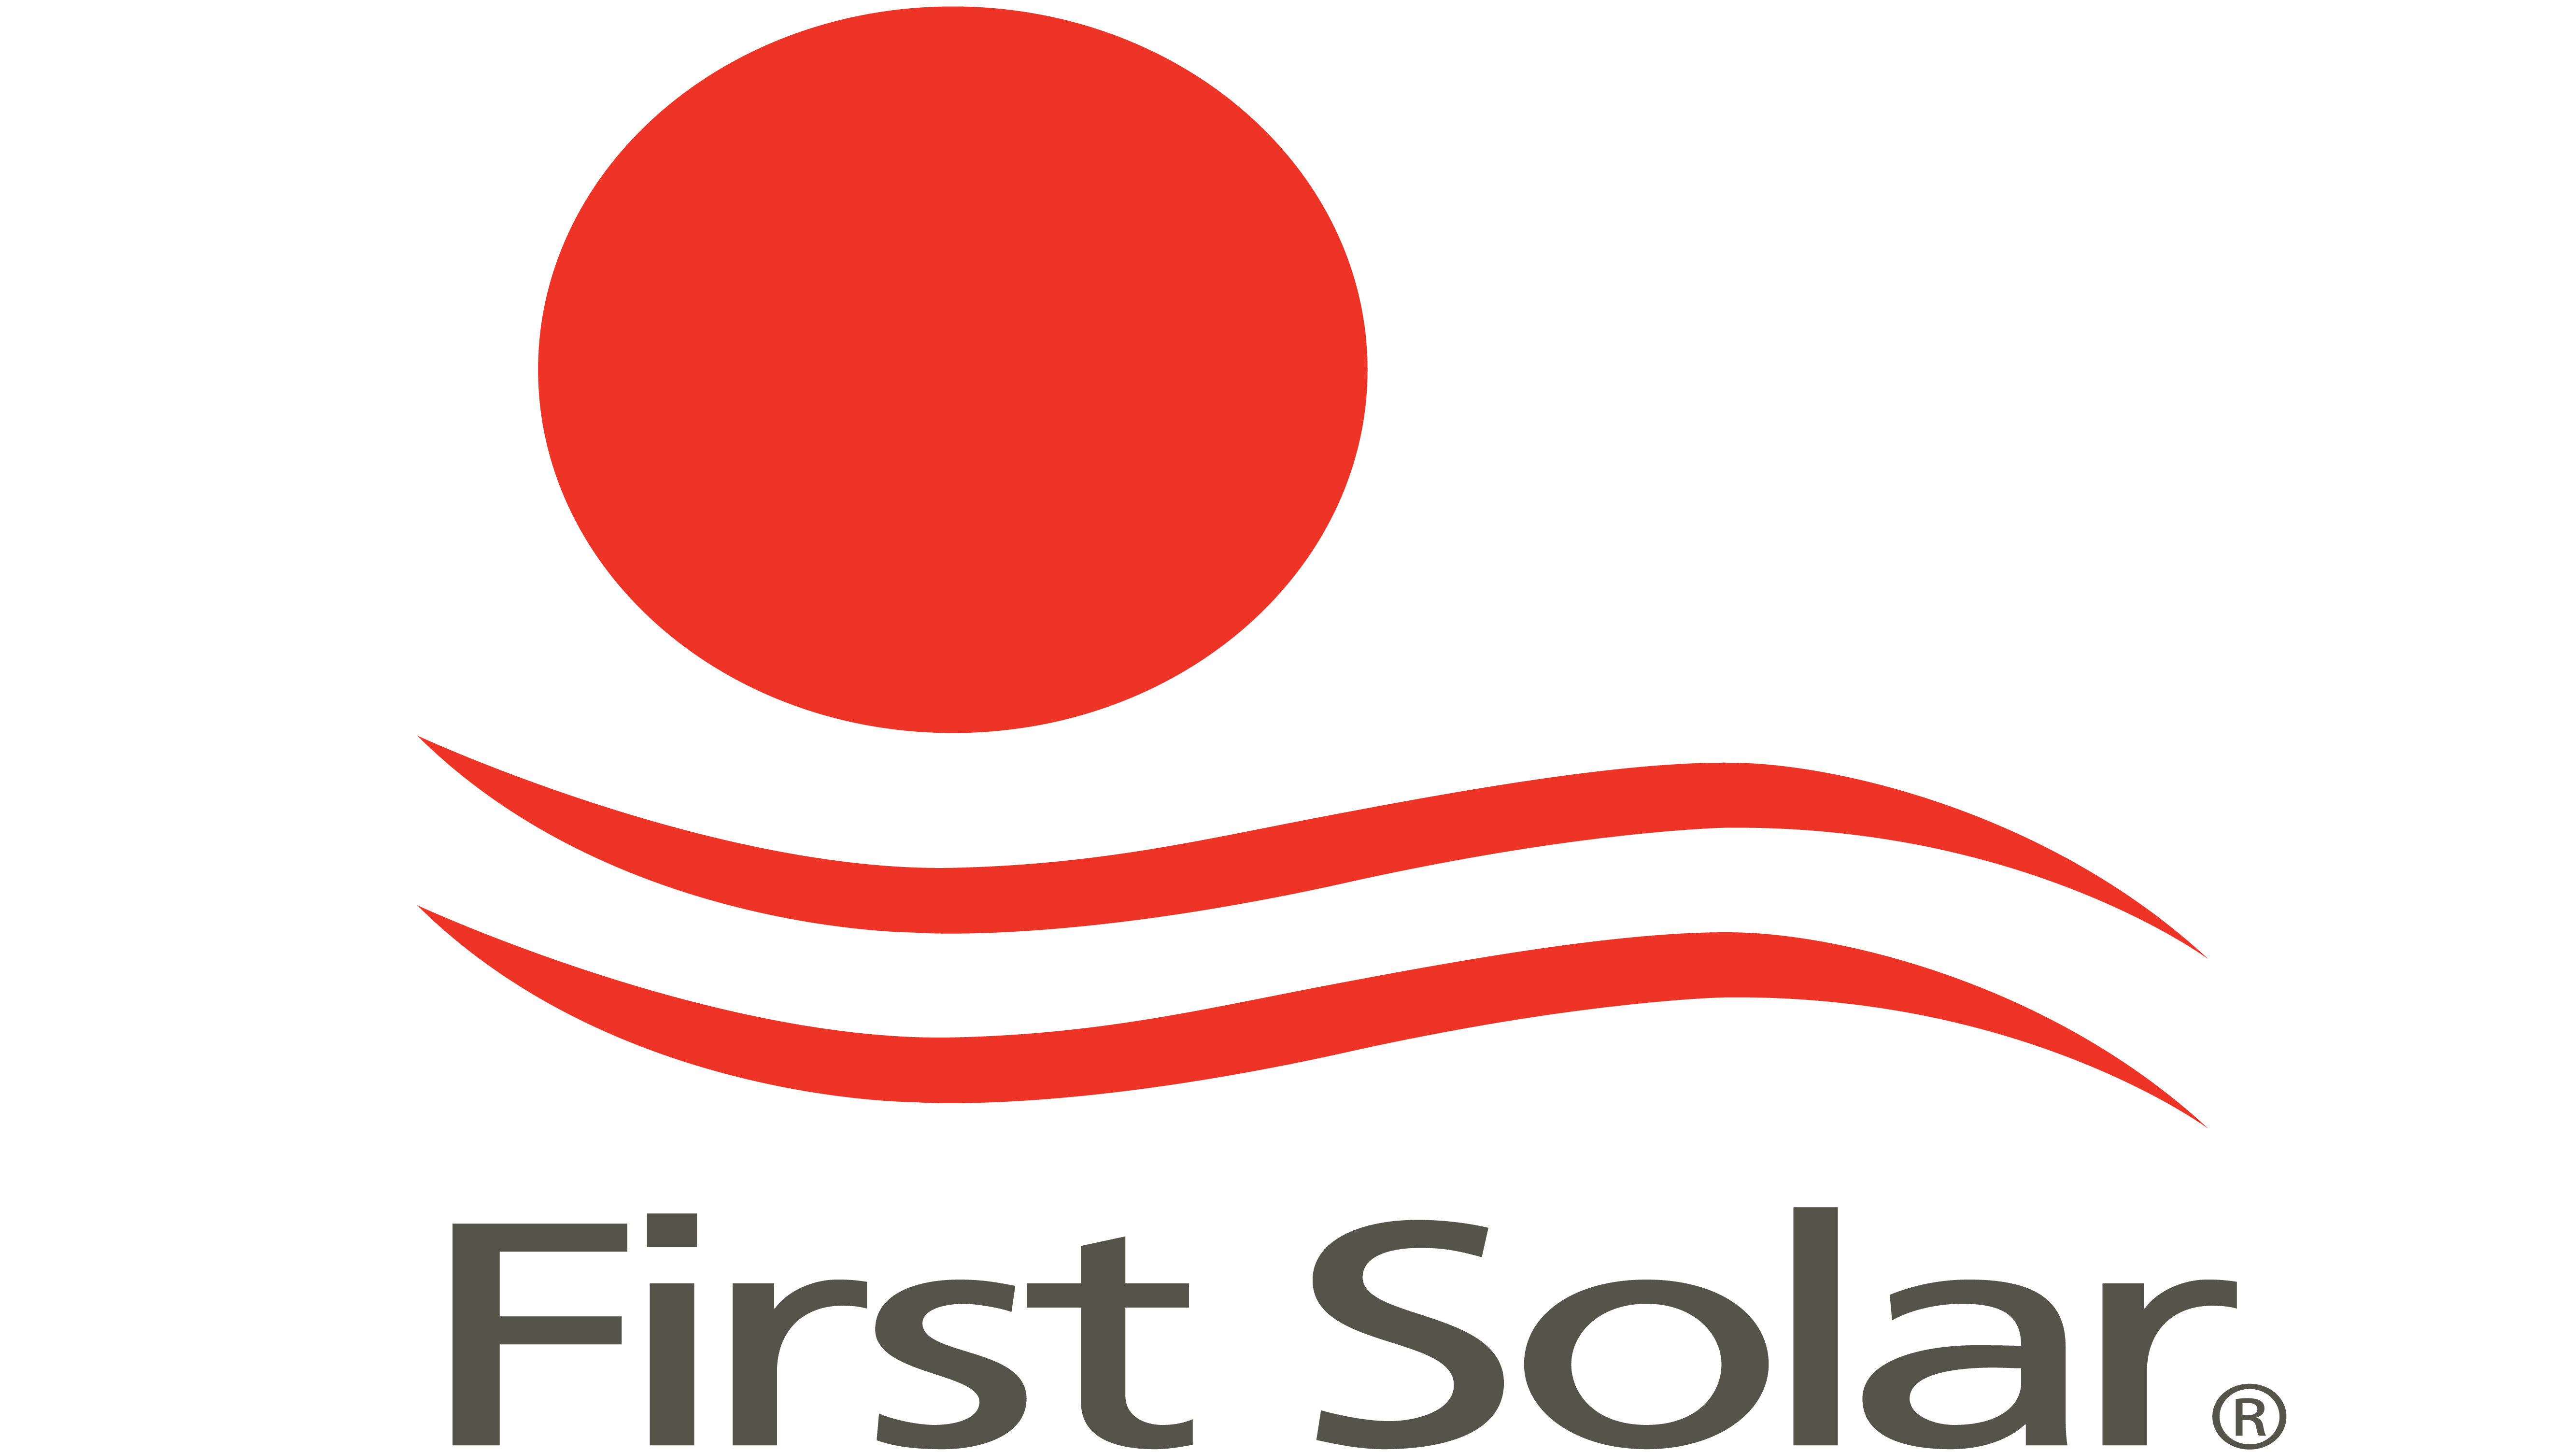 FirstSolar - The Best Ethical & Socially Responsible Company to Invest In